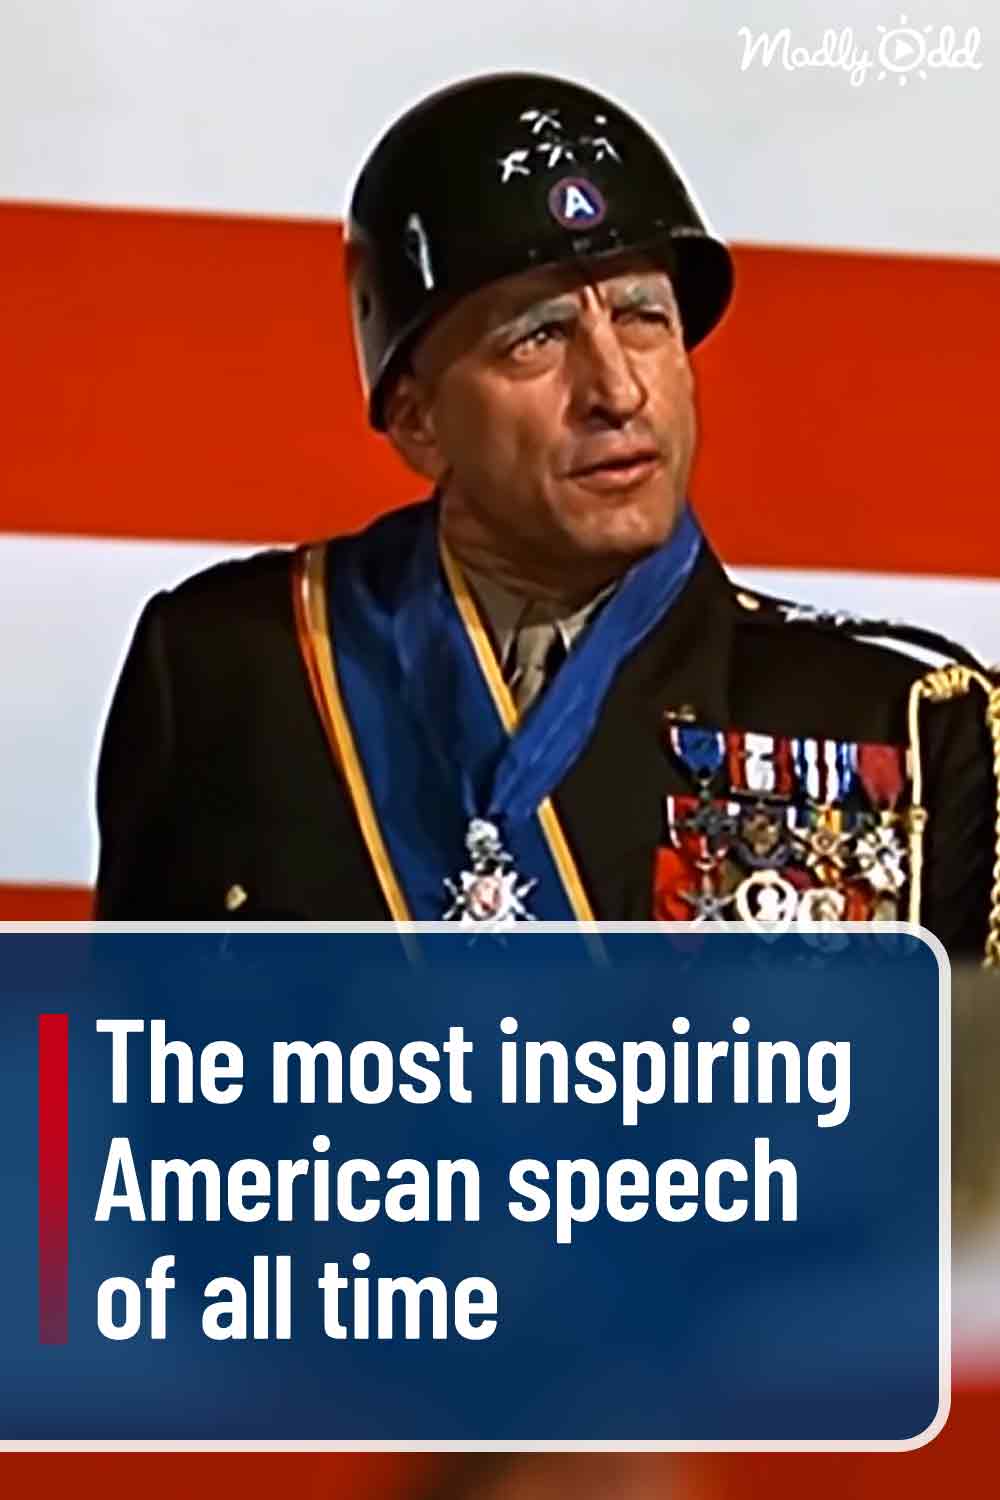 The most inspiring American speech of all time